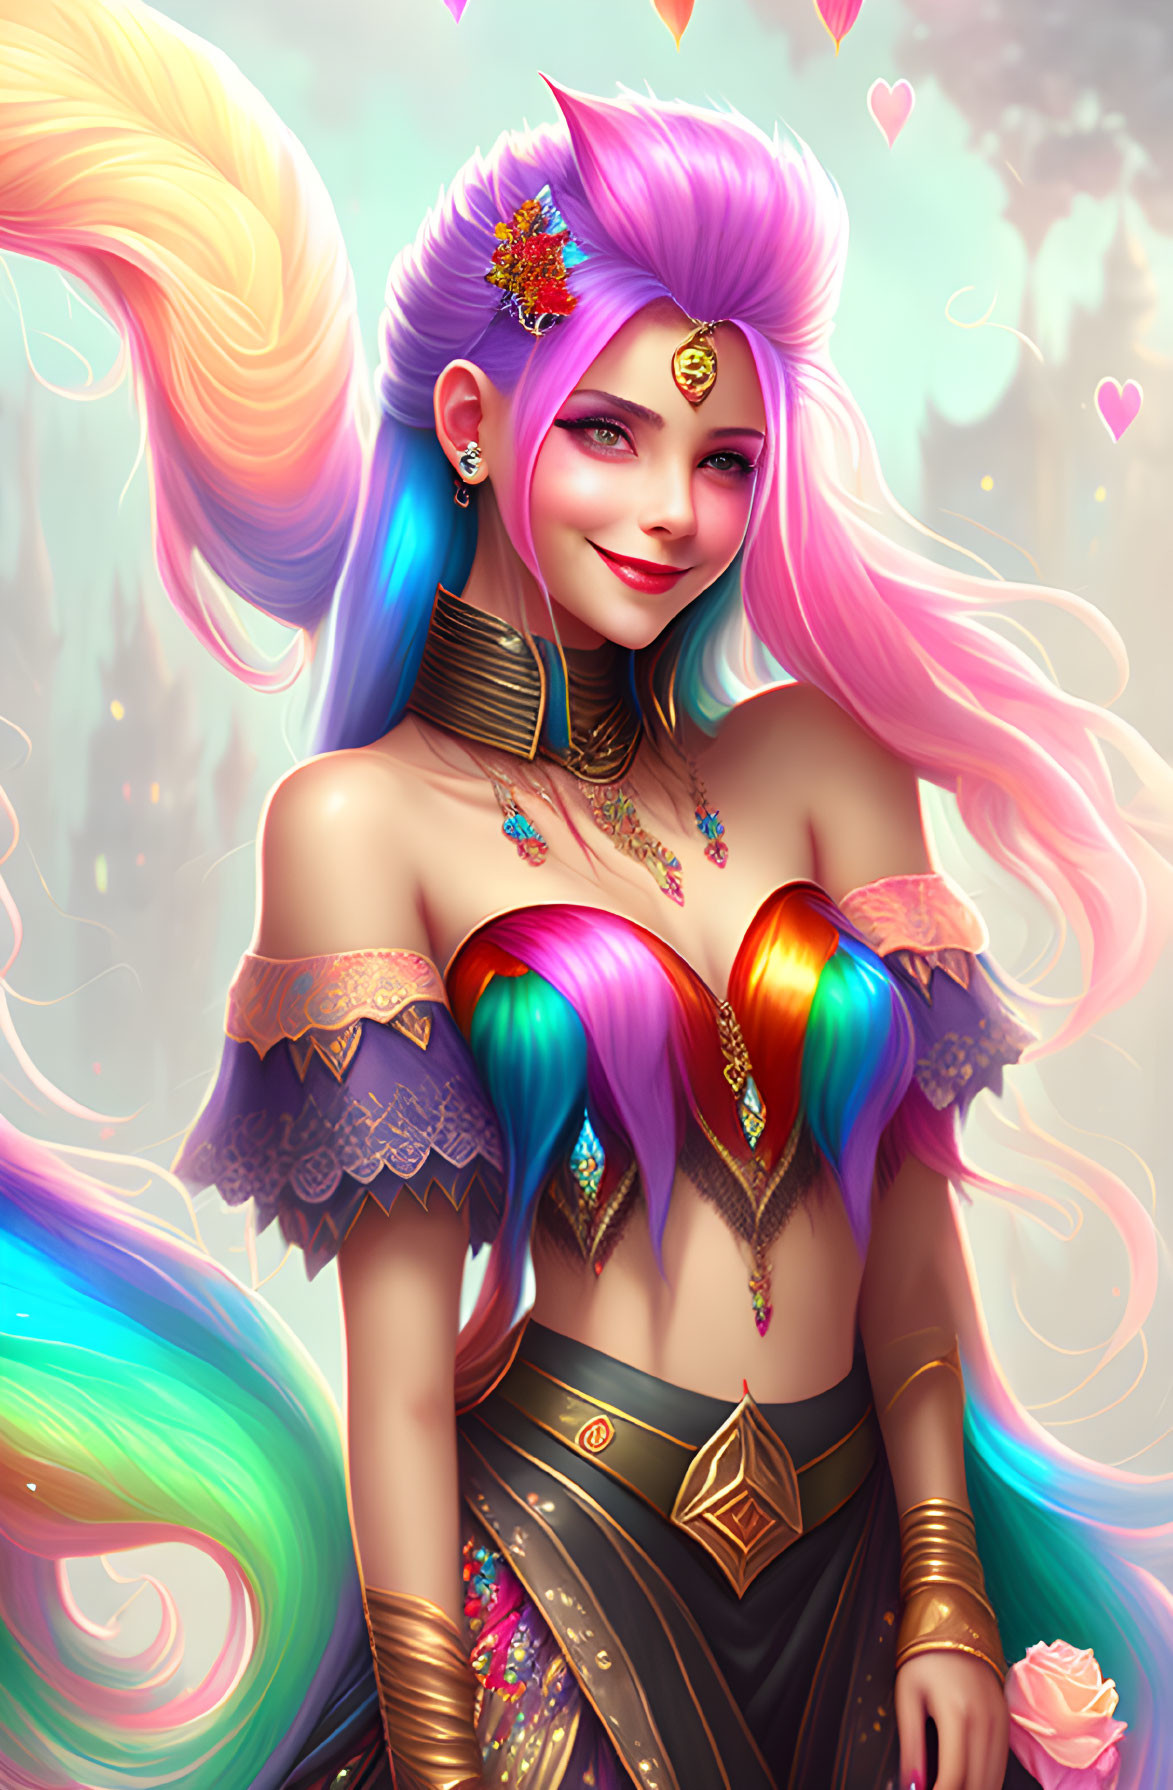 Colorful Fantasy Character with Purple Hair and Floral Adornments